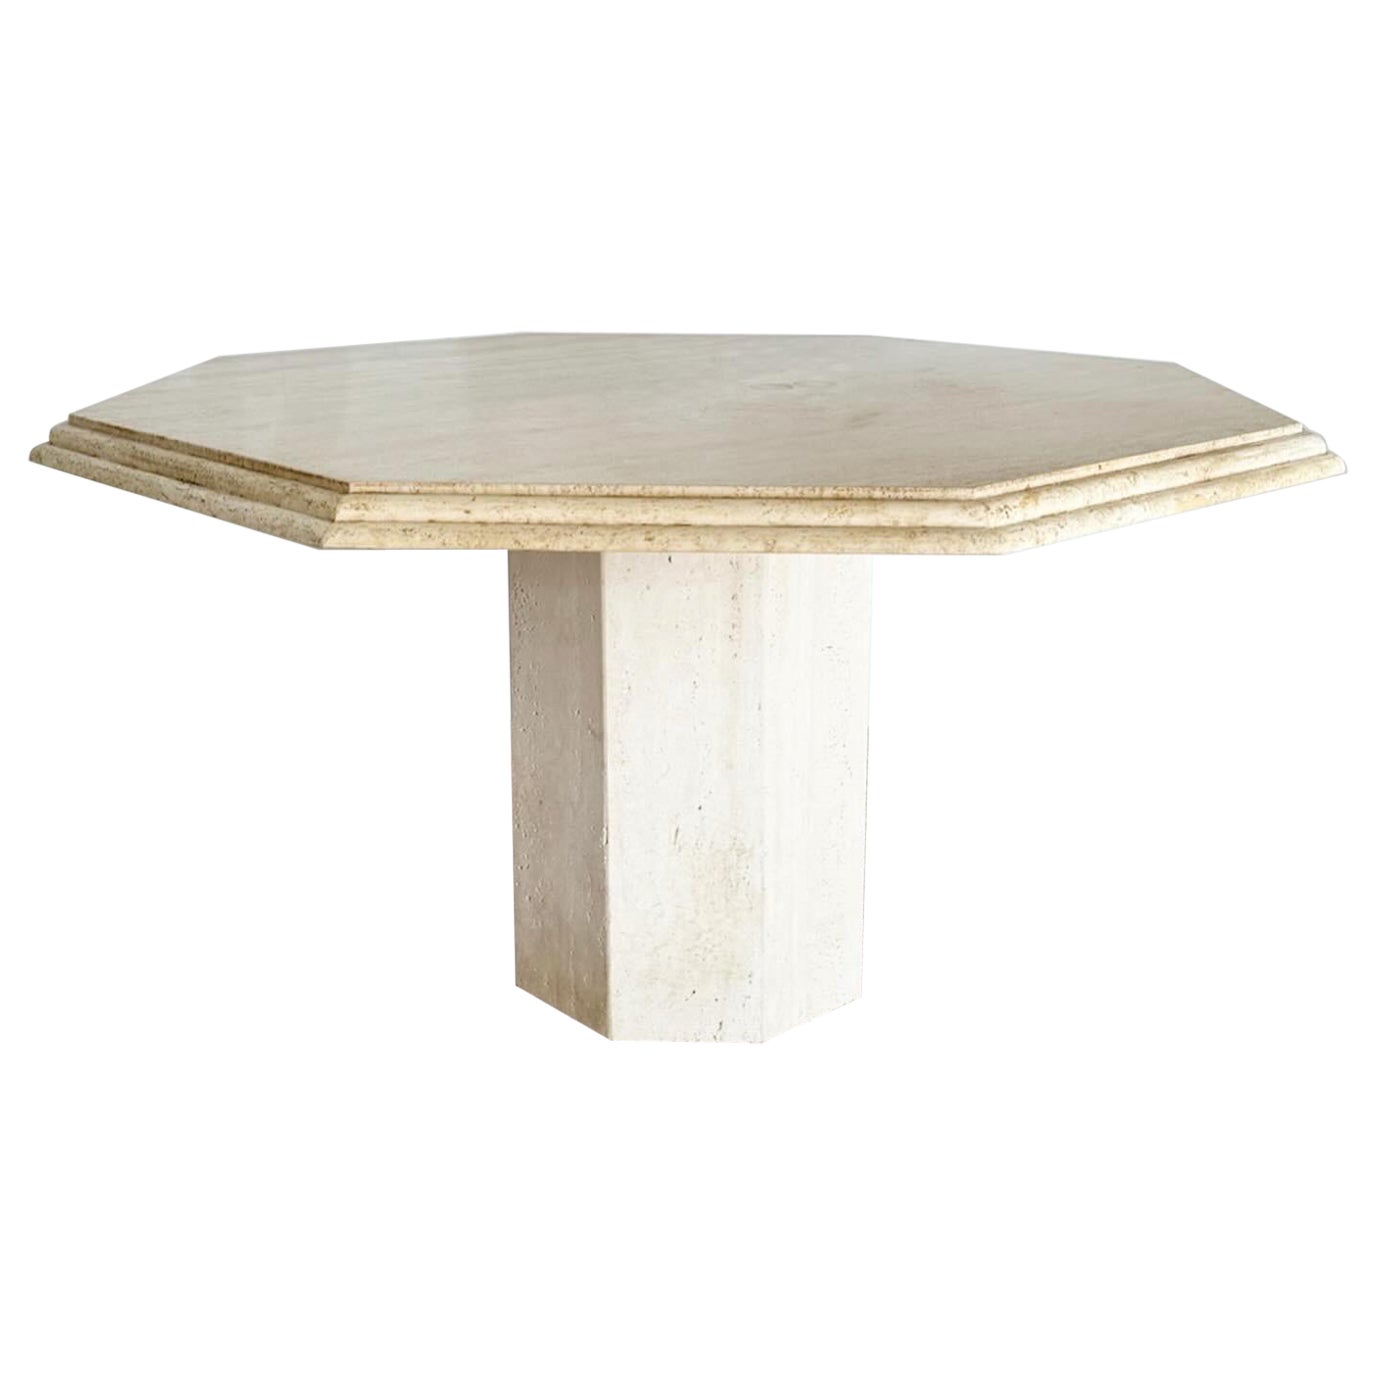 Italian Octagonal Travertine Dining Table For Sale